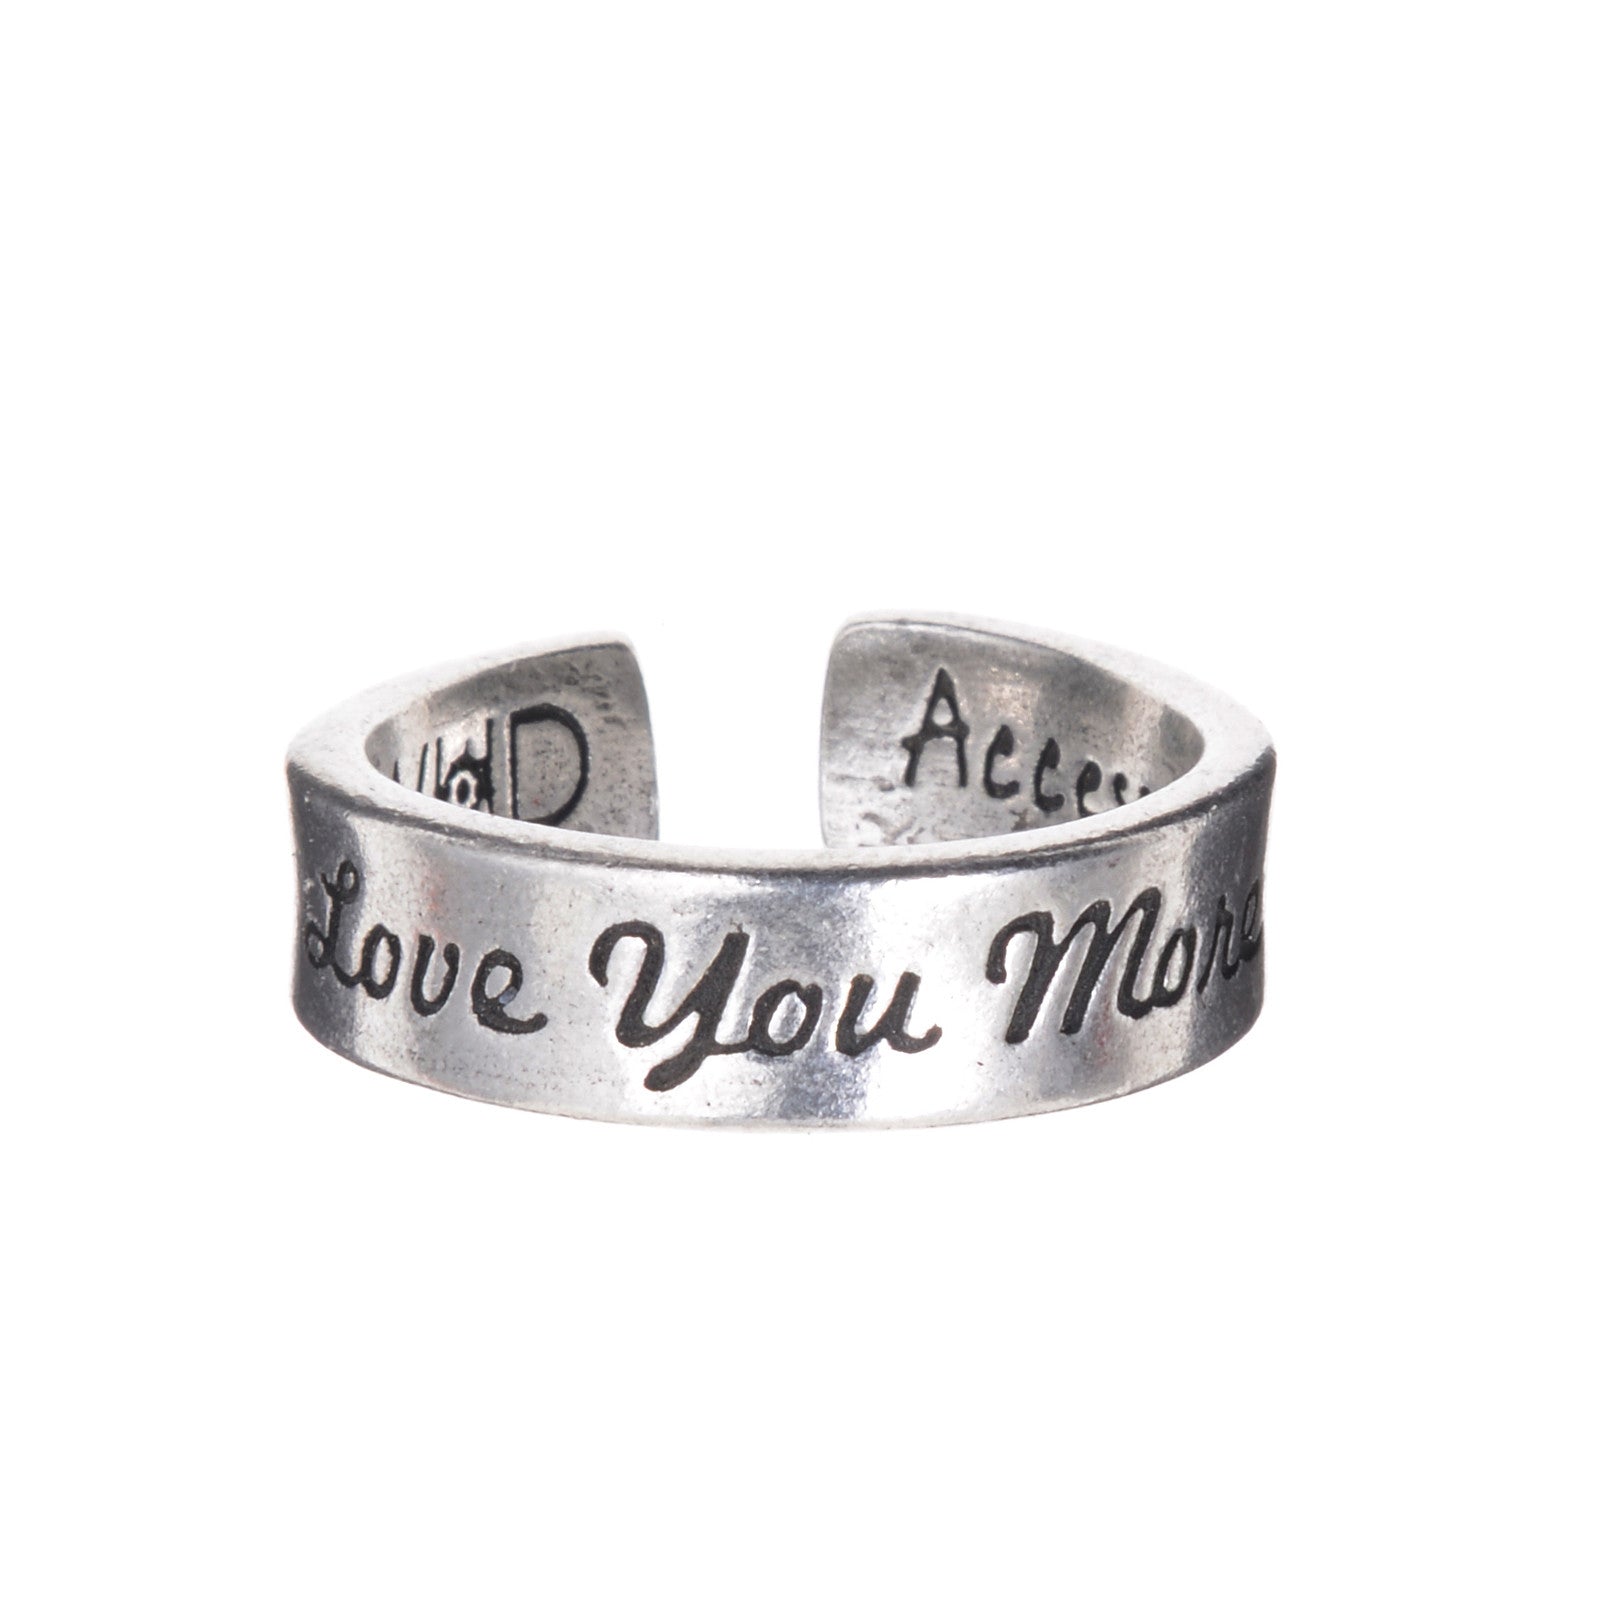 Love You More & Love You Most Ring Set, Mother Daughter Rings, Matching Mom  Daughter Jewelry, Mother's Day Gift for Mom, Hand Stamped Rings - Etsy